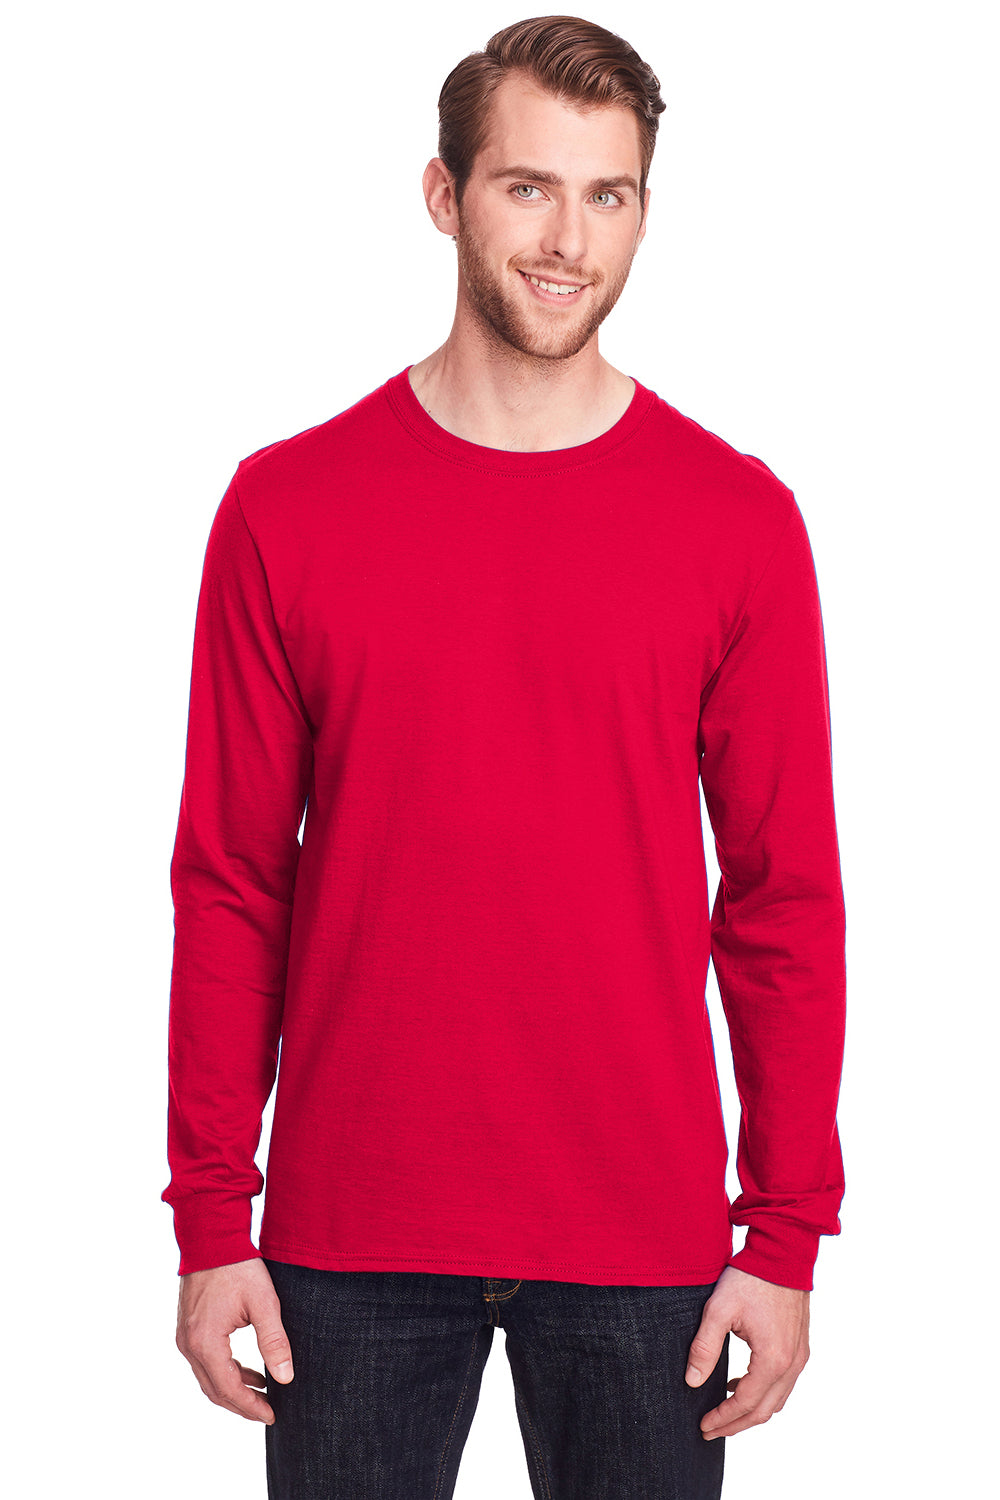 Fruit Of The Loom IC47LSR Mens Iconic Long Sleeve Crewneck T-Shirt Red Front